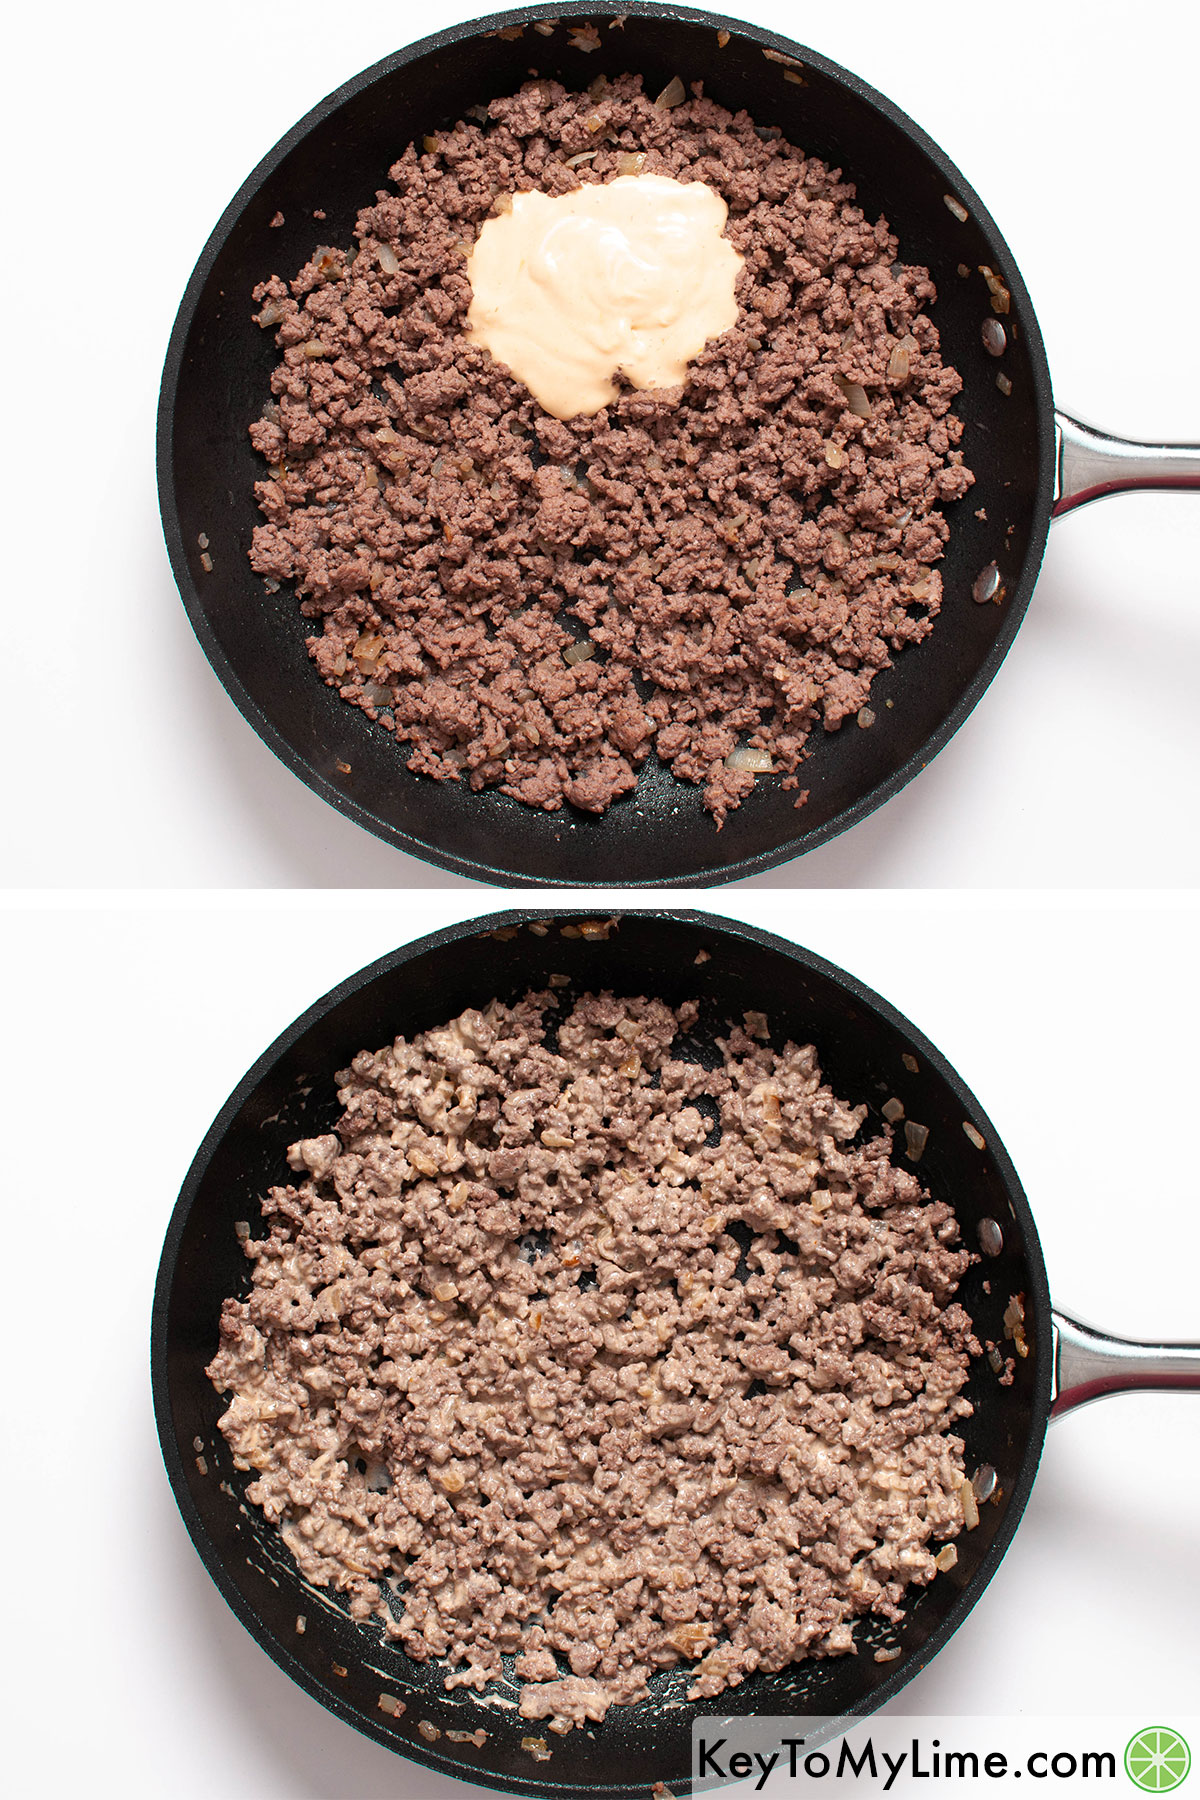 Adding a mayonnaise, ketchup, and mustard sauce into cooked ground beef.